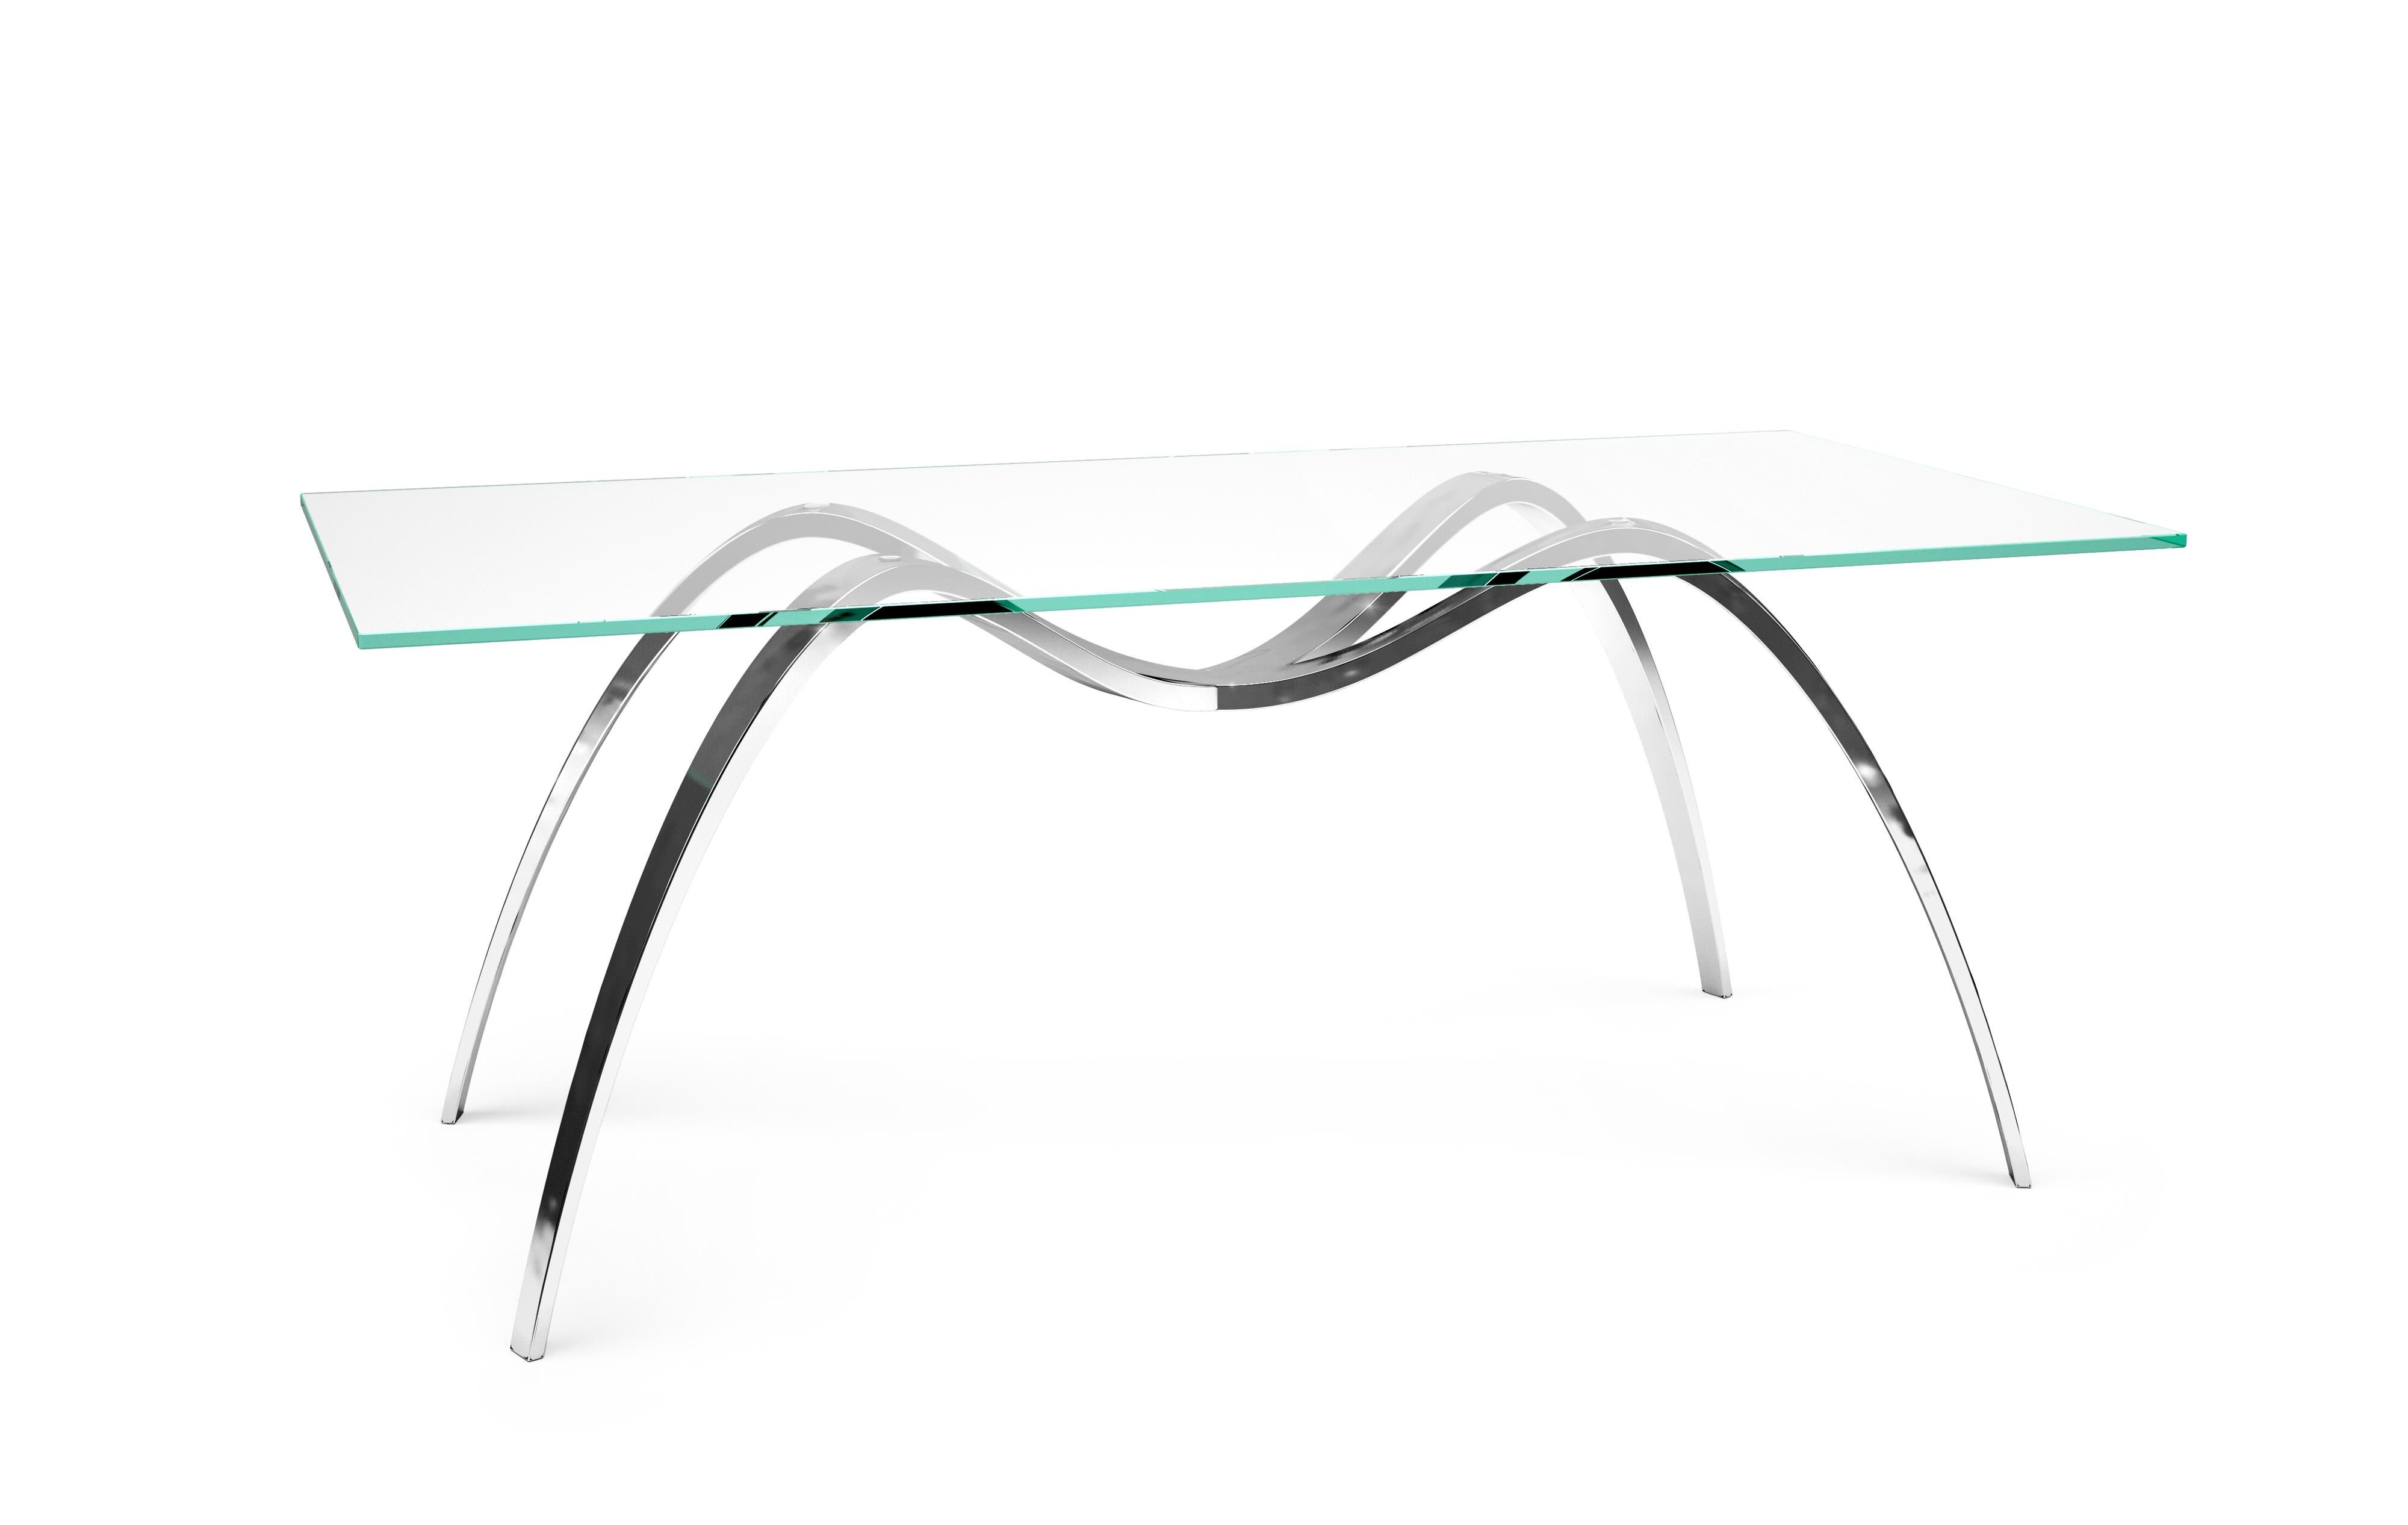 The 'Spider Classic Small'  dining table is made of mirror polished stainless and tabletop in extra-clear crystal glass.

Dining table dimension: L 190 x W 90 x H 75cm. Dimensions are customizable.

Limited Edition of 15.

Each table is hand signed